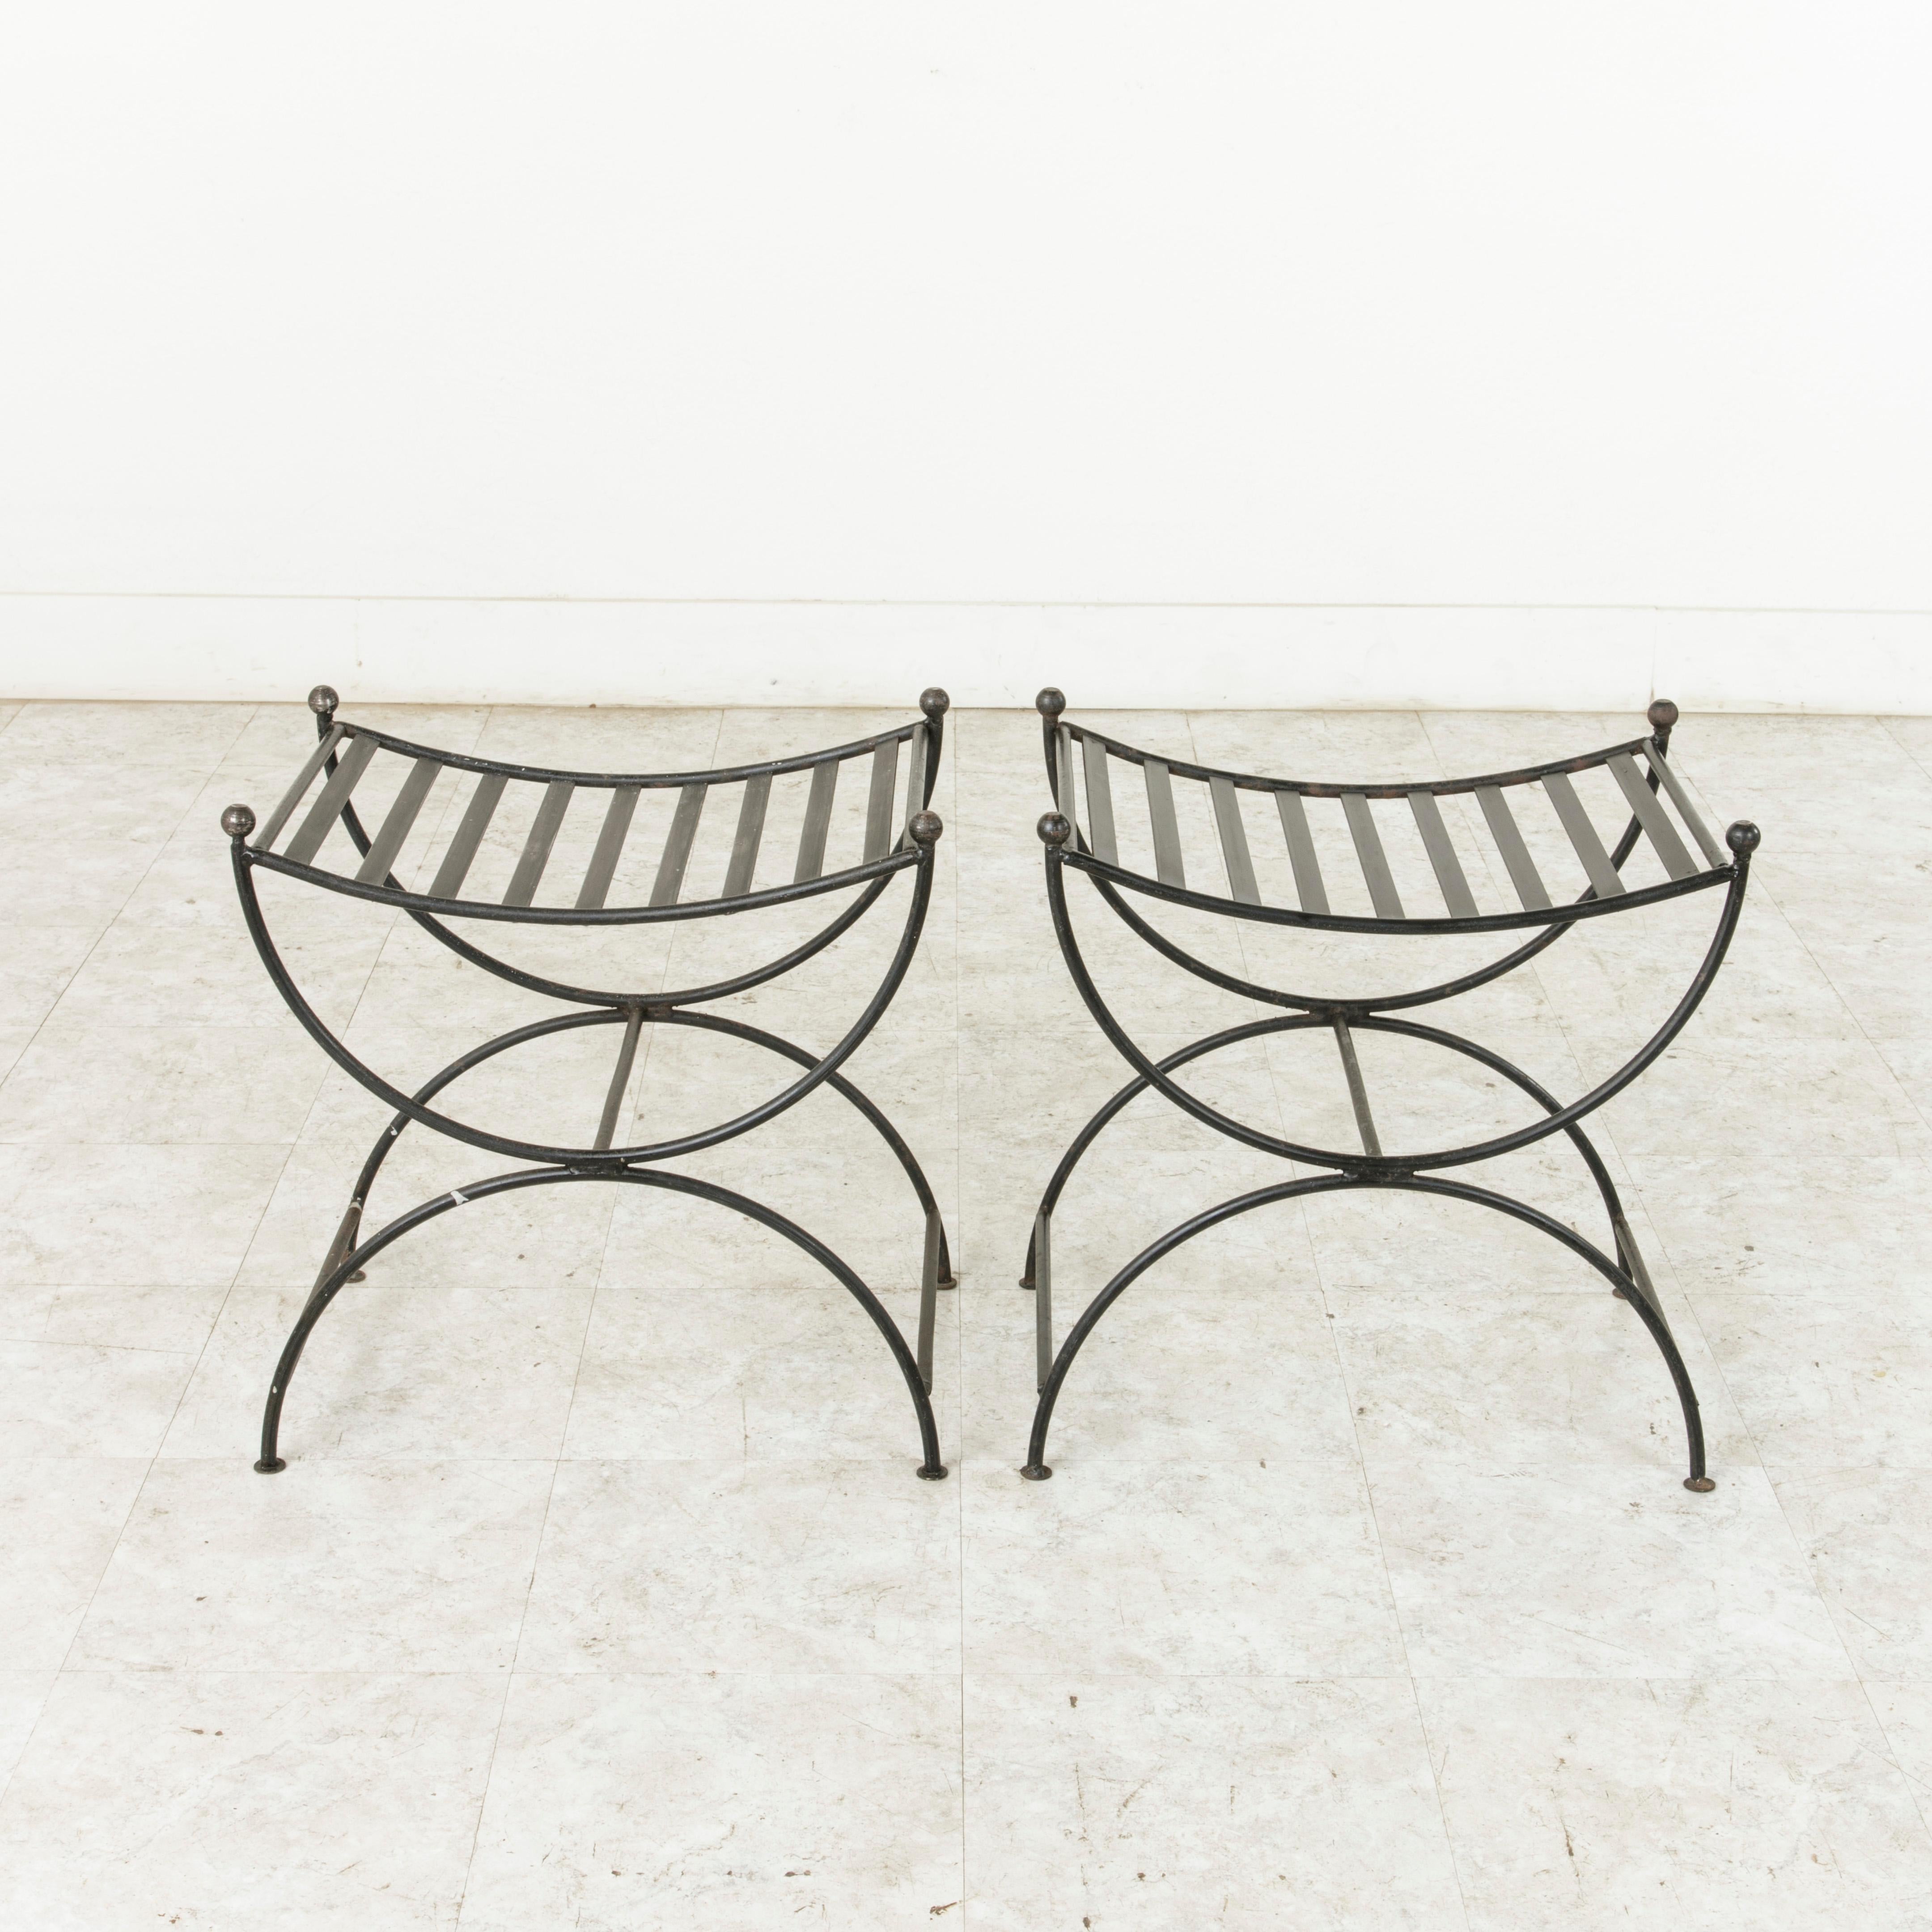 Pair of Mid-20th Century French Iron Benches, Banquettes, or Stools 2